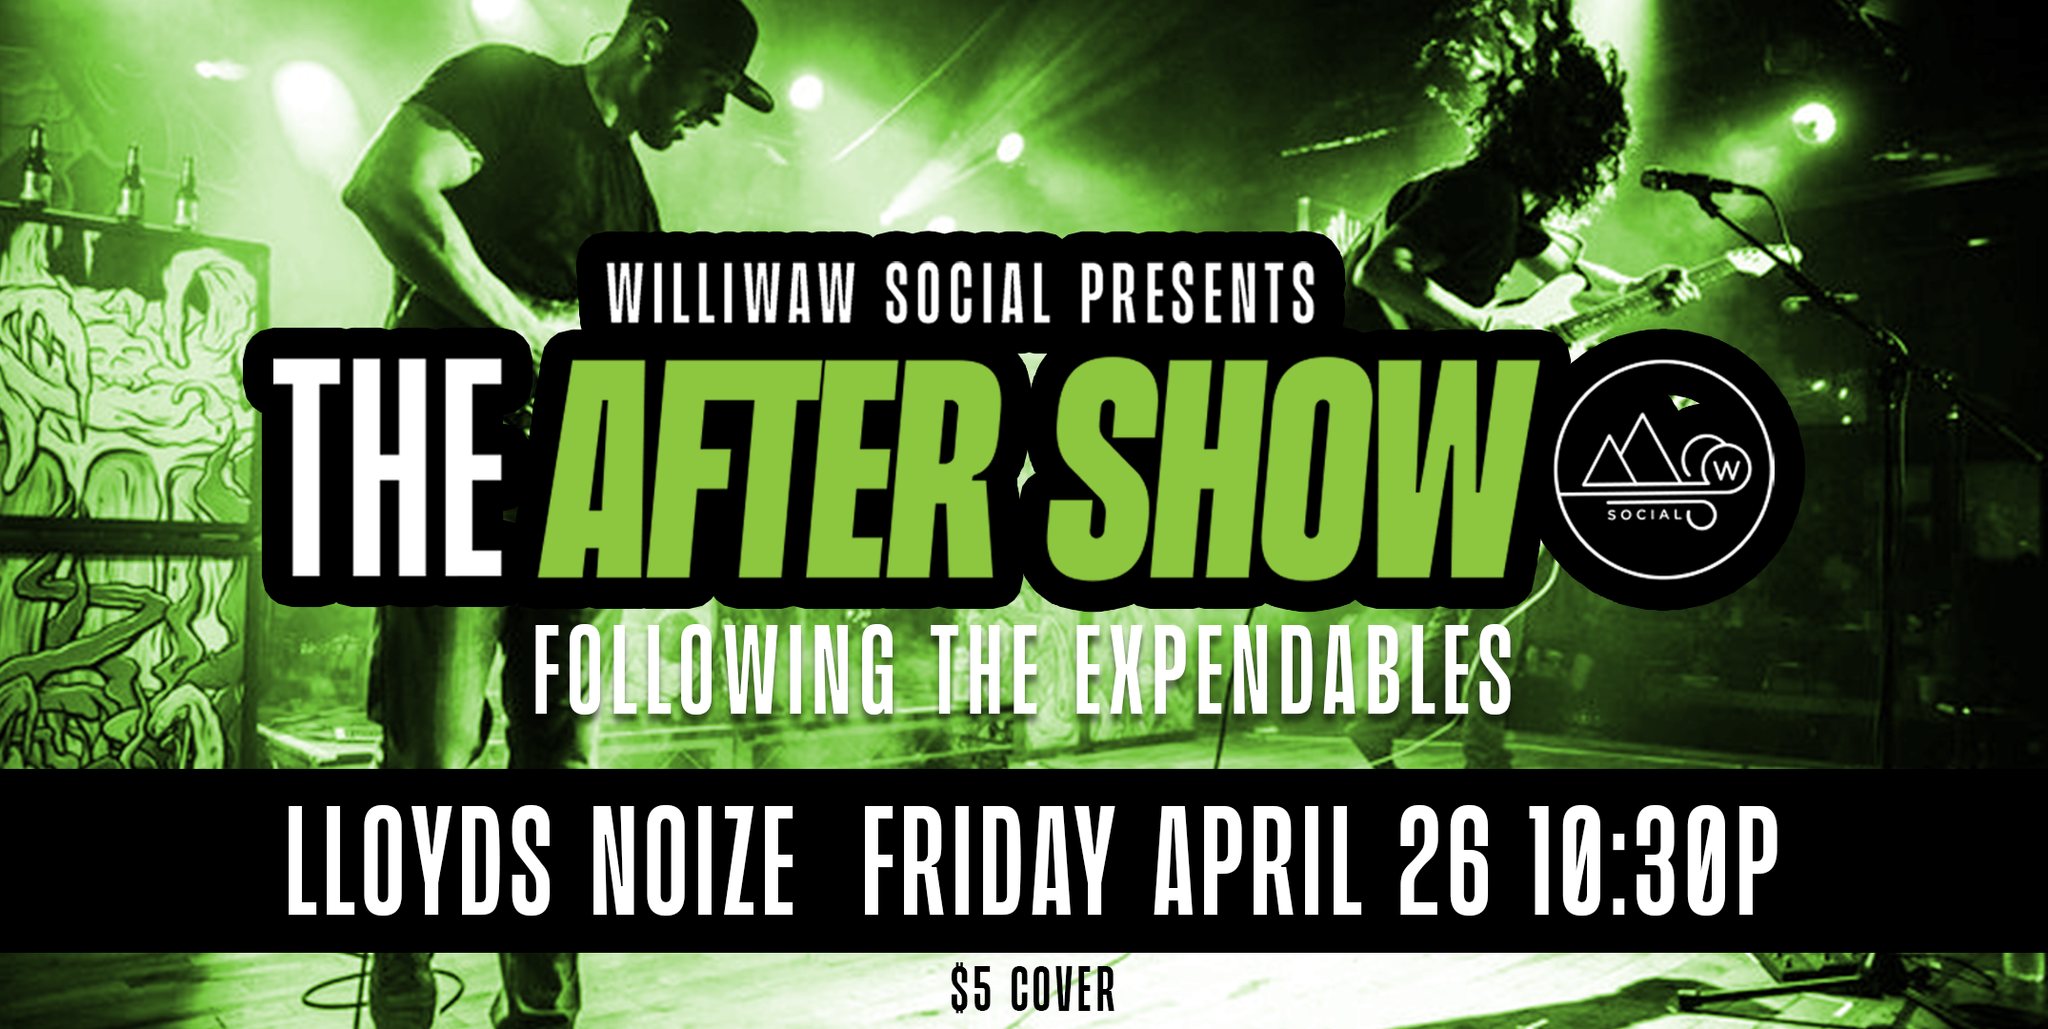 Lloyds Noize - After Show @ Williwaw